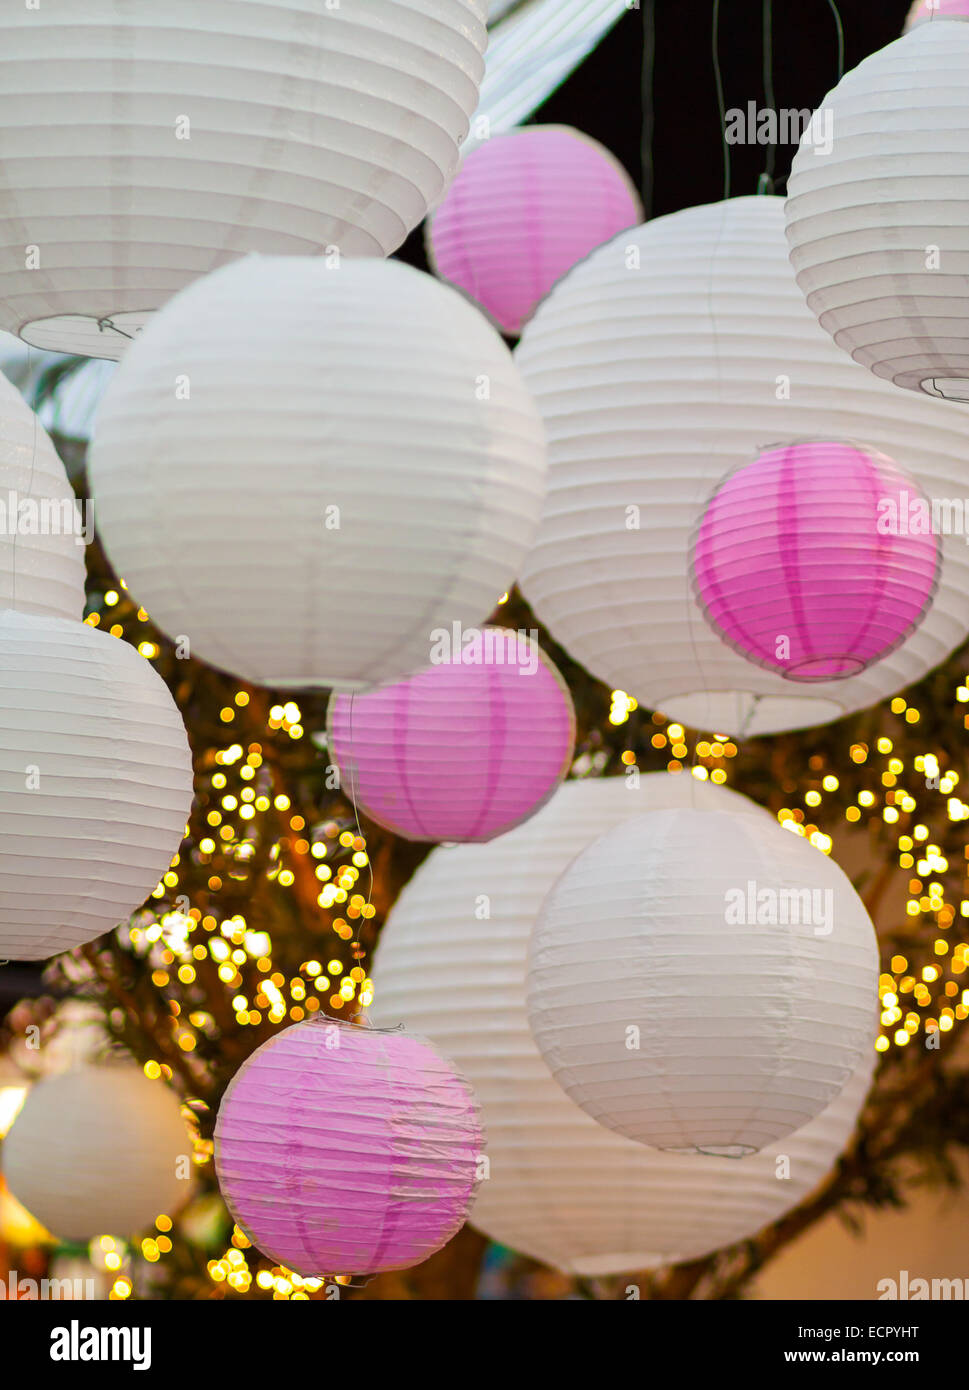 White And Pink Light Balls Hanging On A Ceiling With Christmas